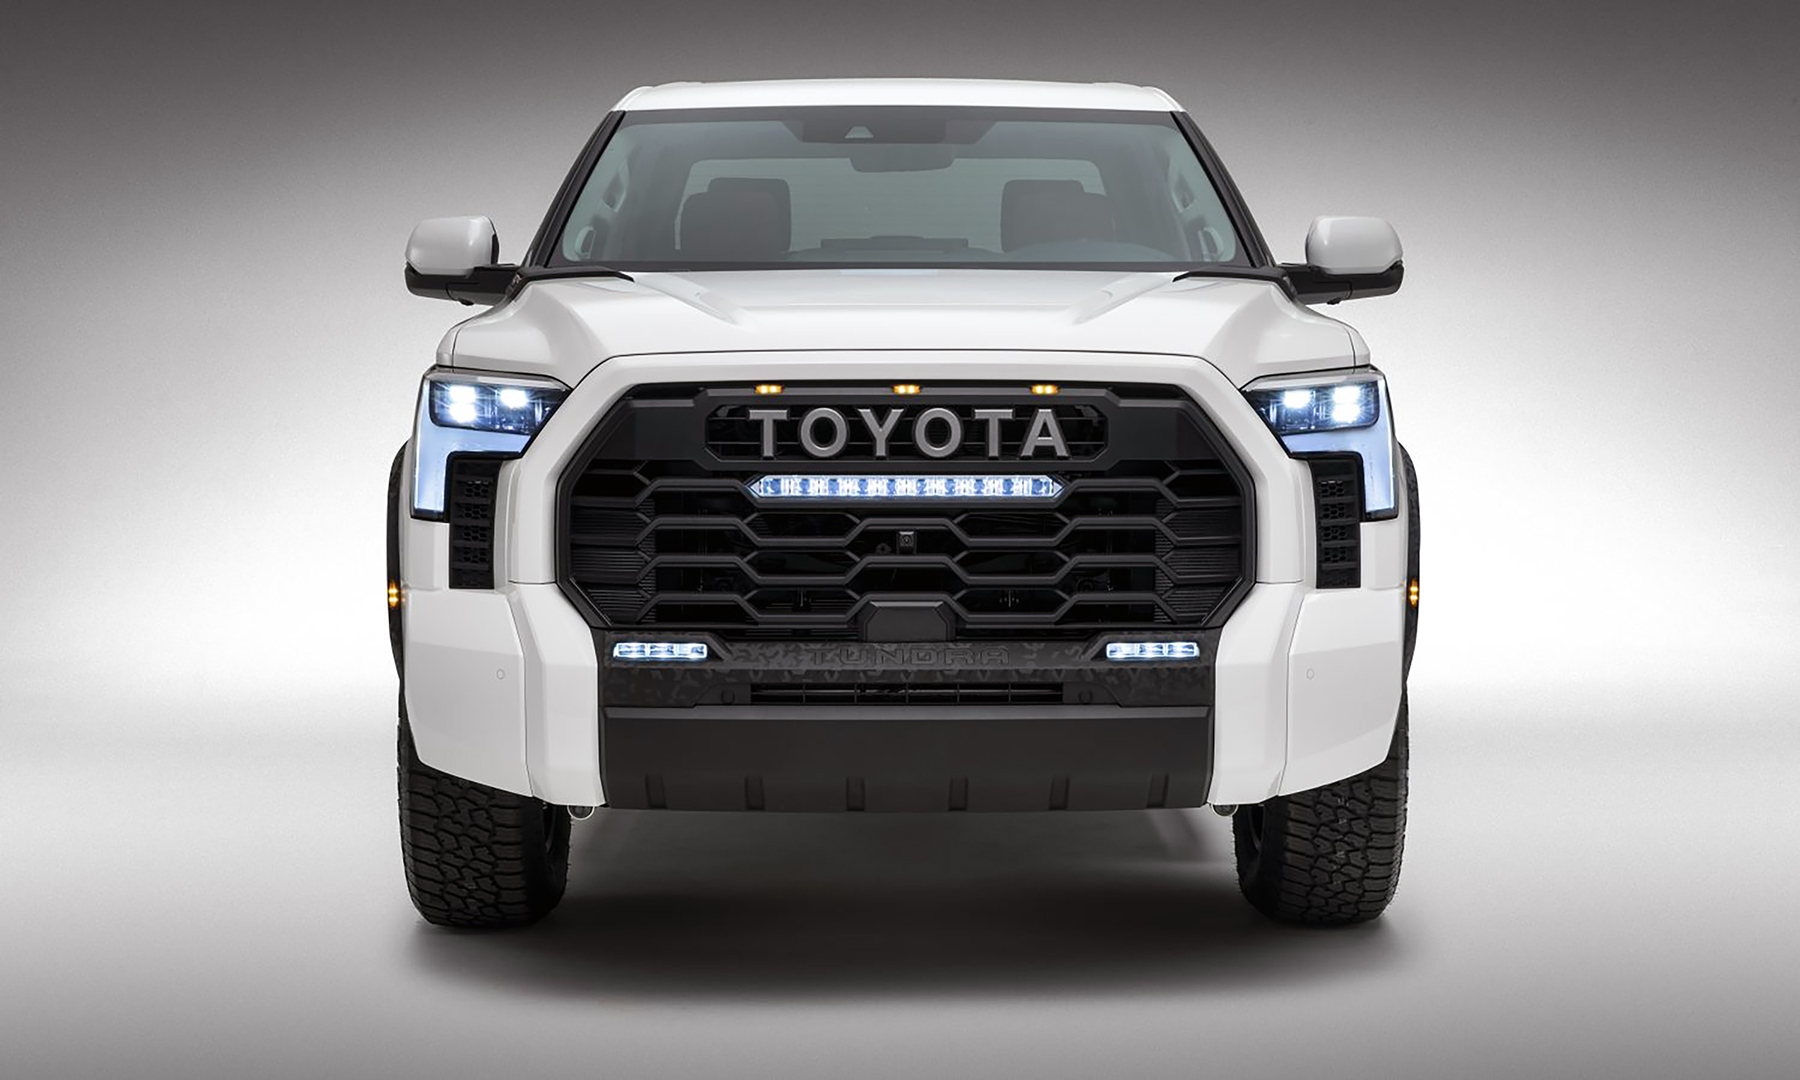 2022 Toyota Tundra Trd Pro Towing Capacity Lawrence Rubbo